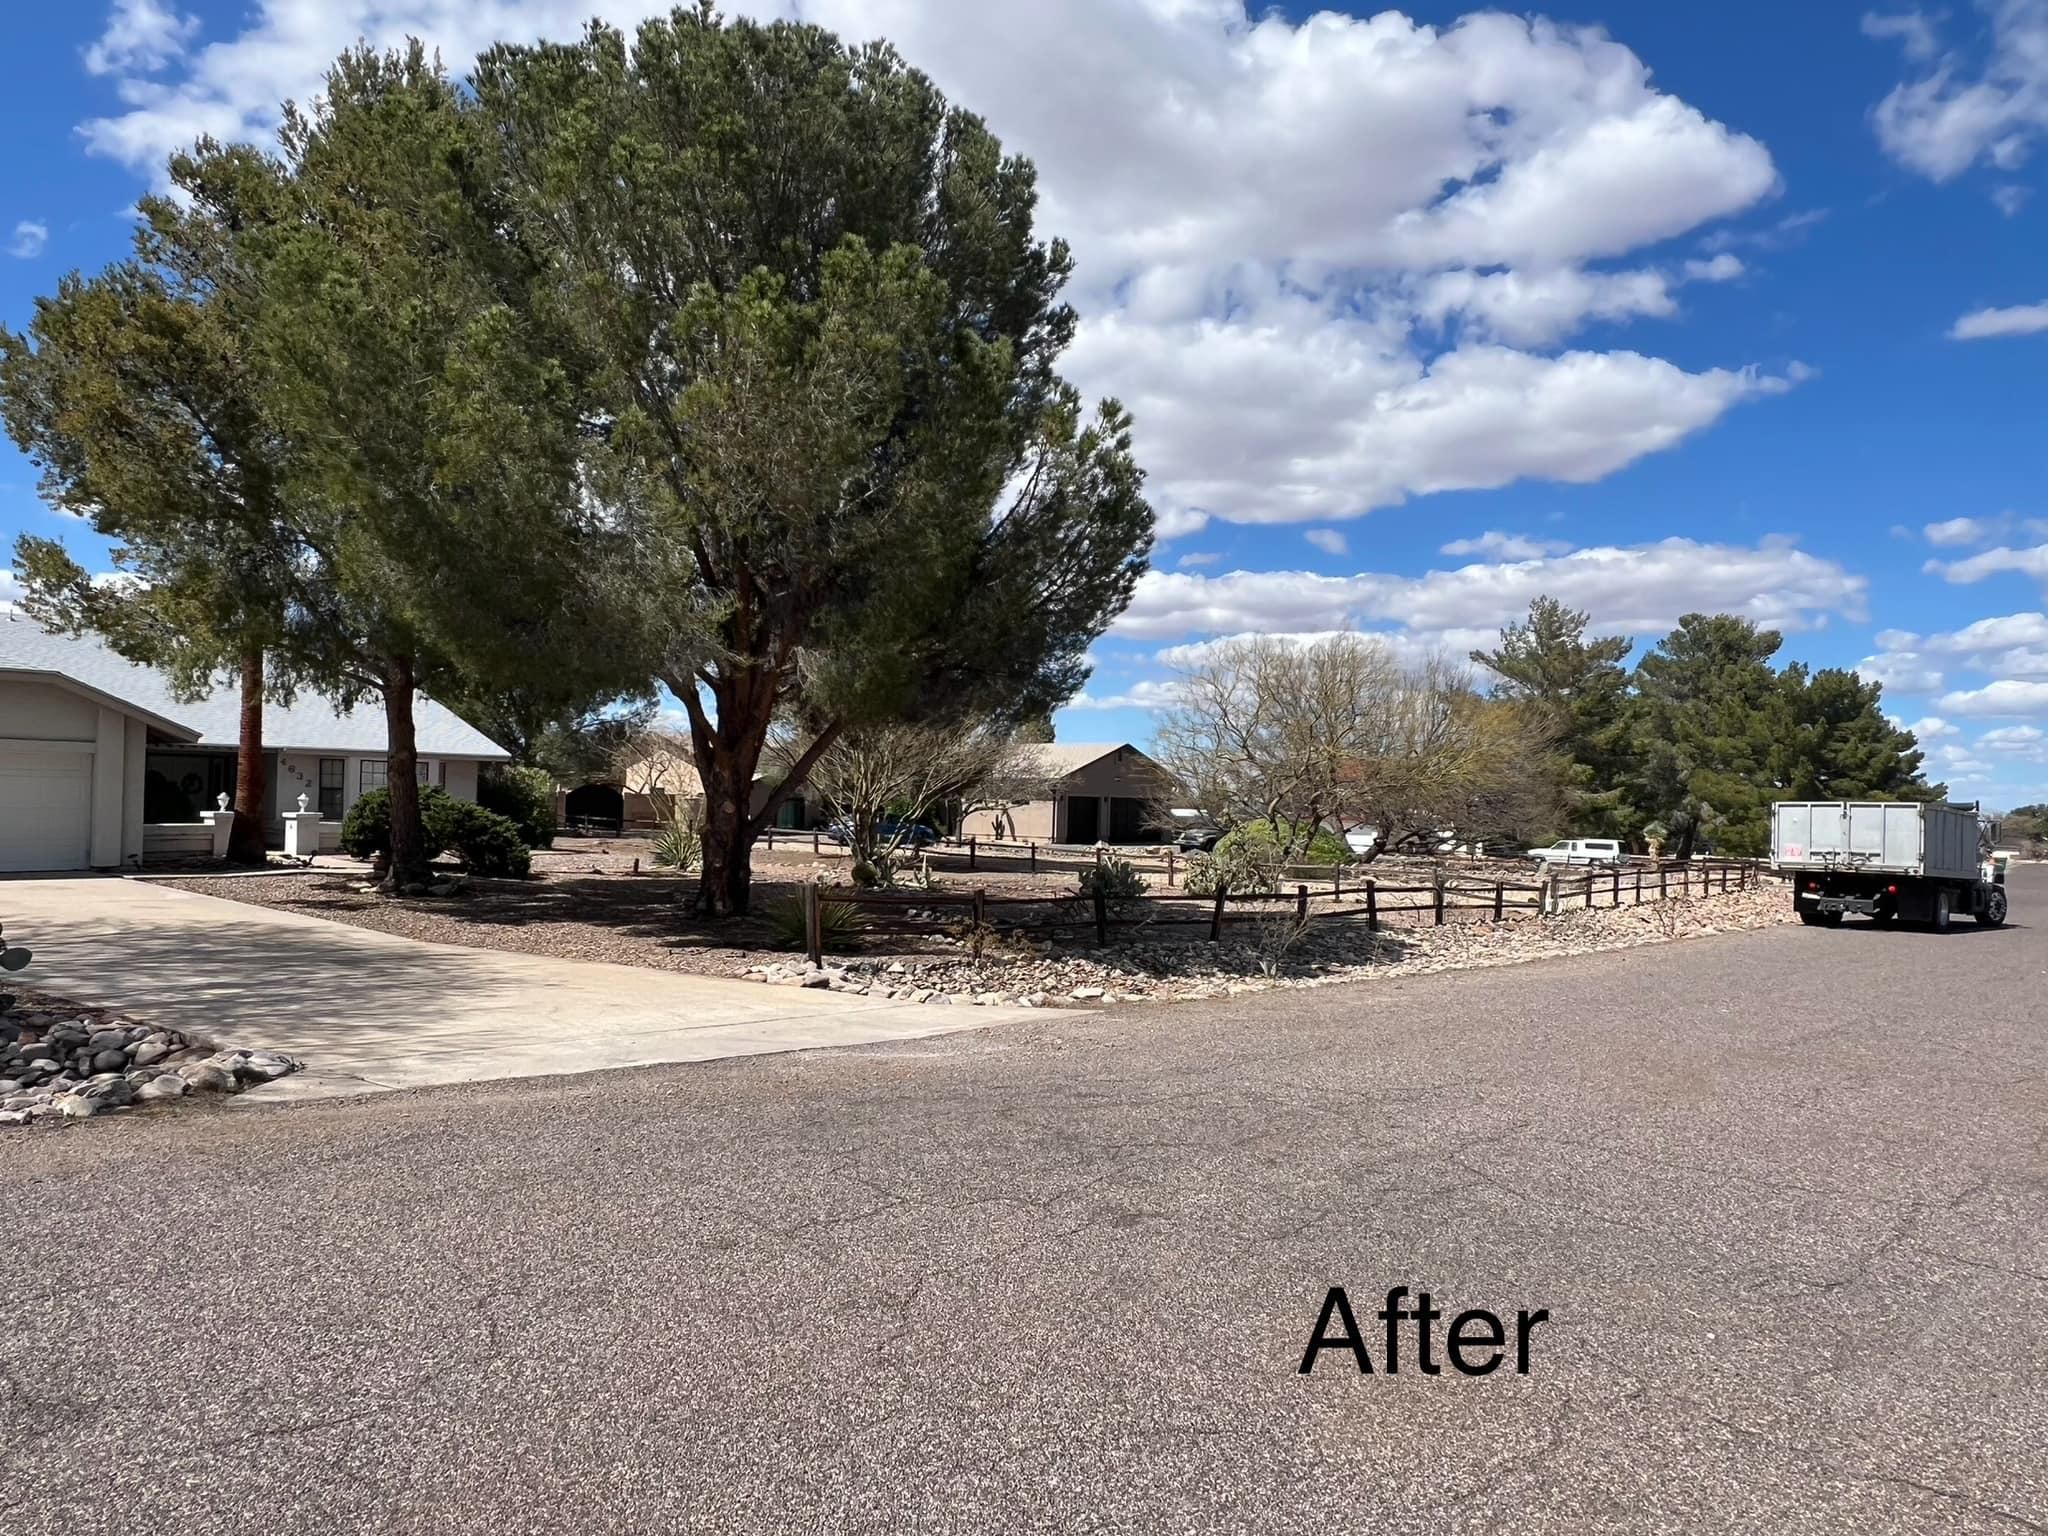 Stump Removal for By Faith Landscaping in Sierra Vista, AZ